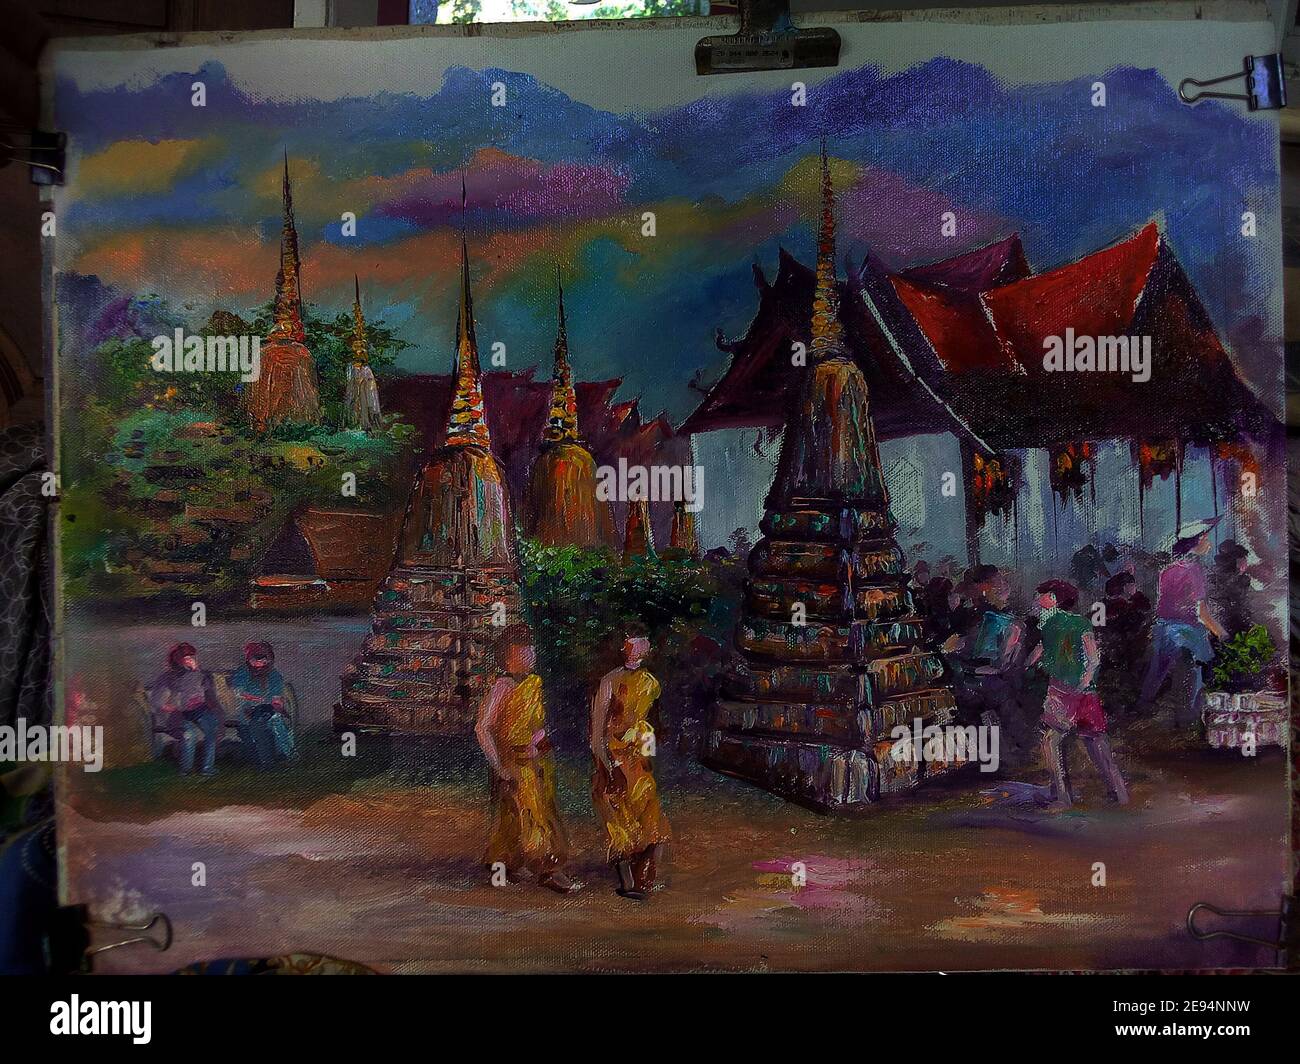 oil ,painting ,The shadow ,of the temple ,from Thailand , Chedis at Wat Pho Temple Stock Photo